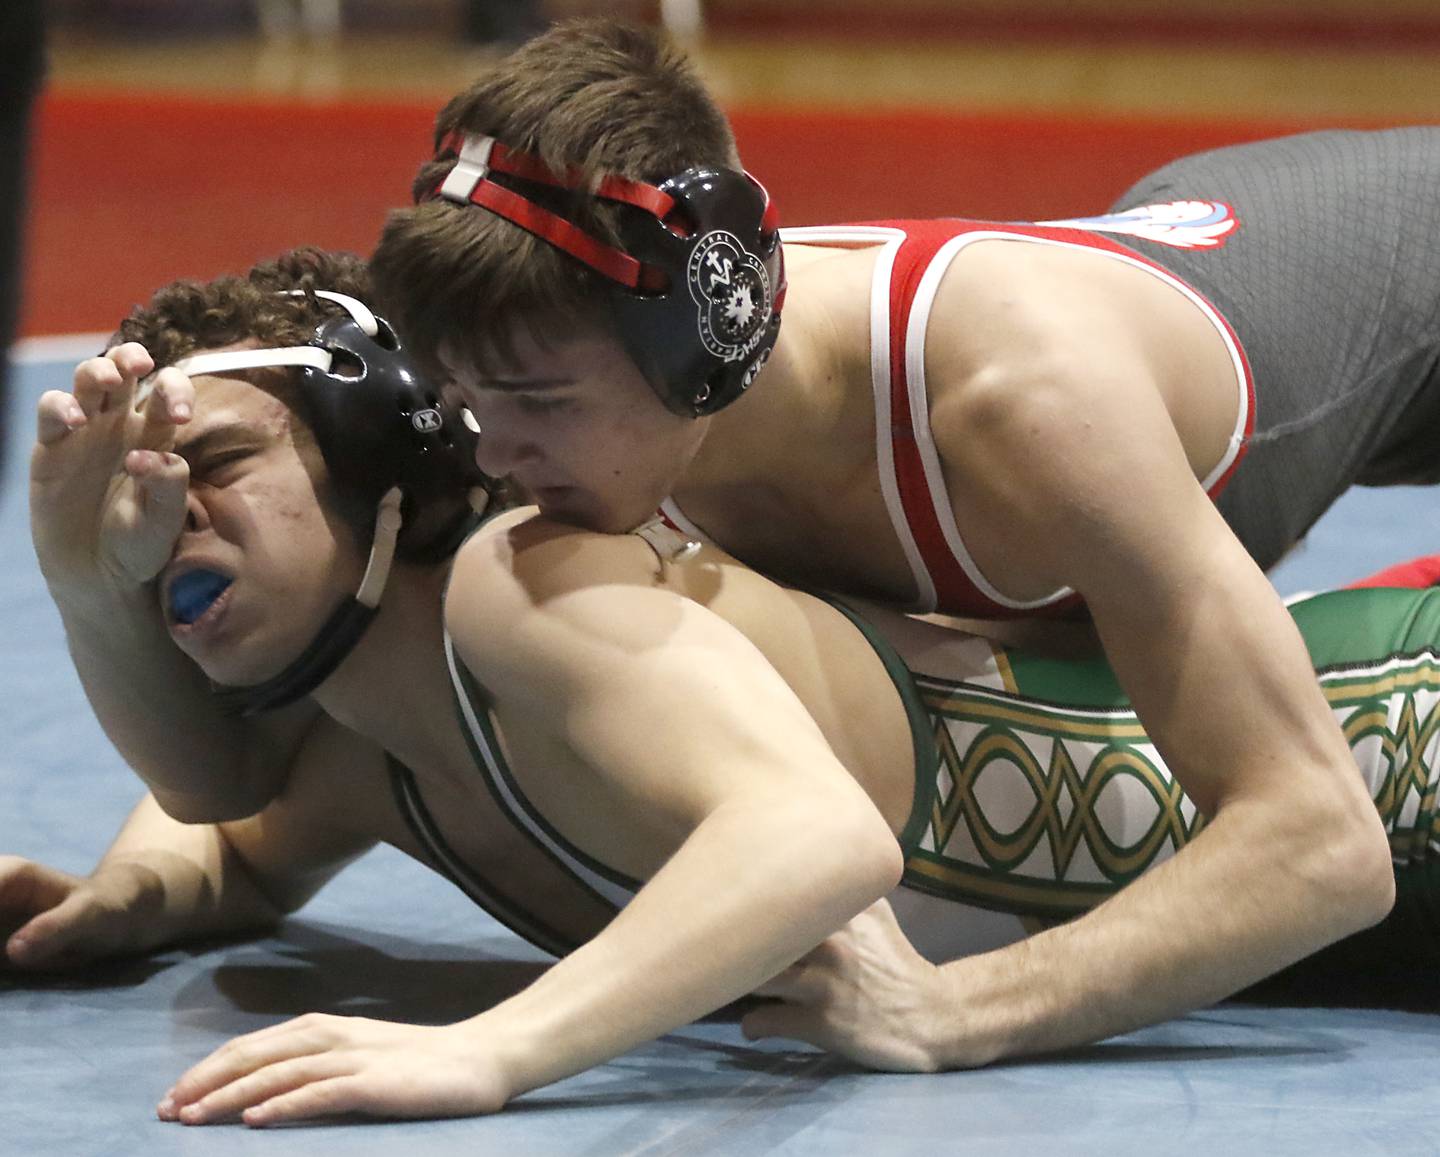 Marian Central's Vance Williams control St. Patrick's Benjamin Kusar in their 132-pound wrestling match Thursday, Jan. 19, 2023, at Marian Central High School in Woodstock.